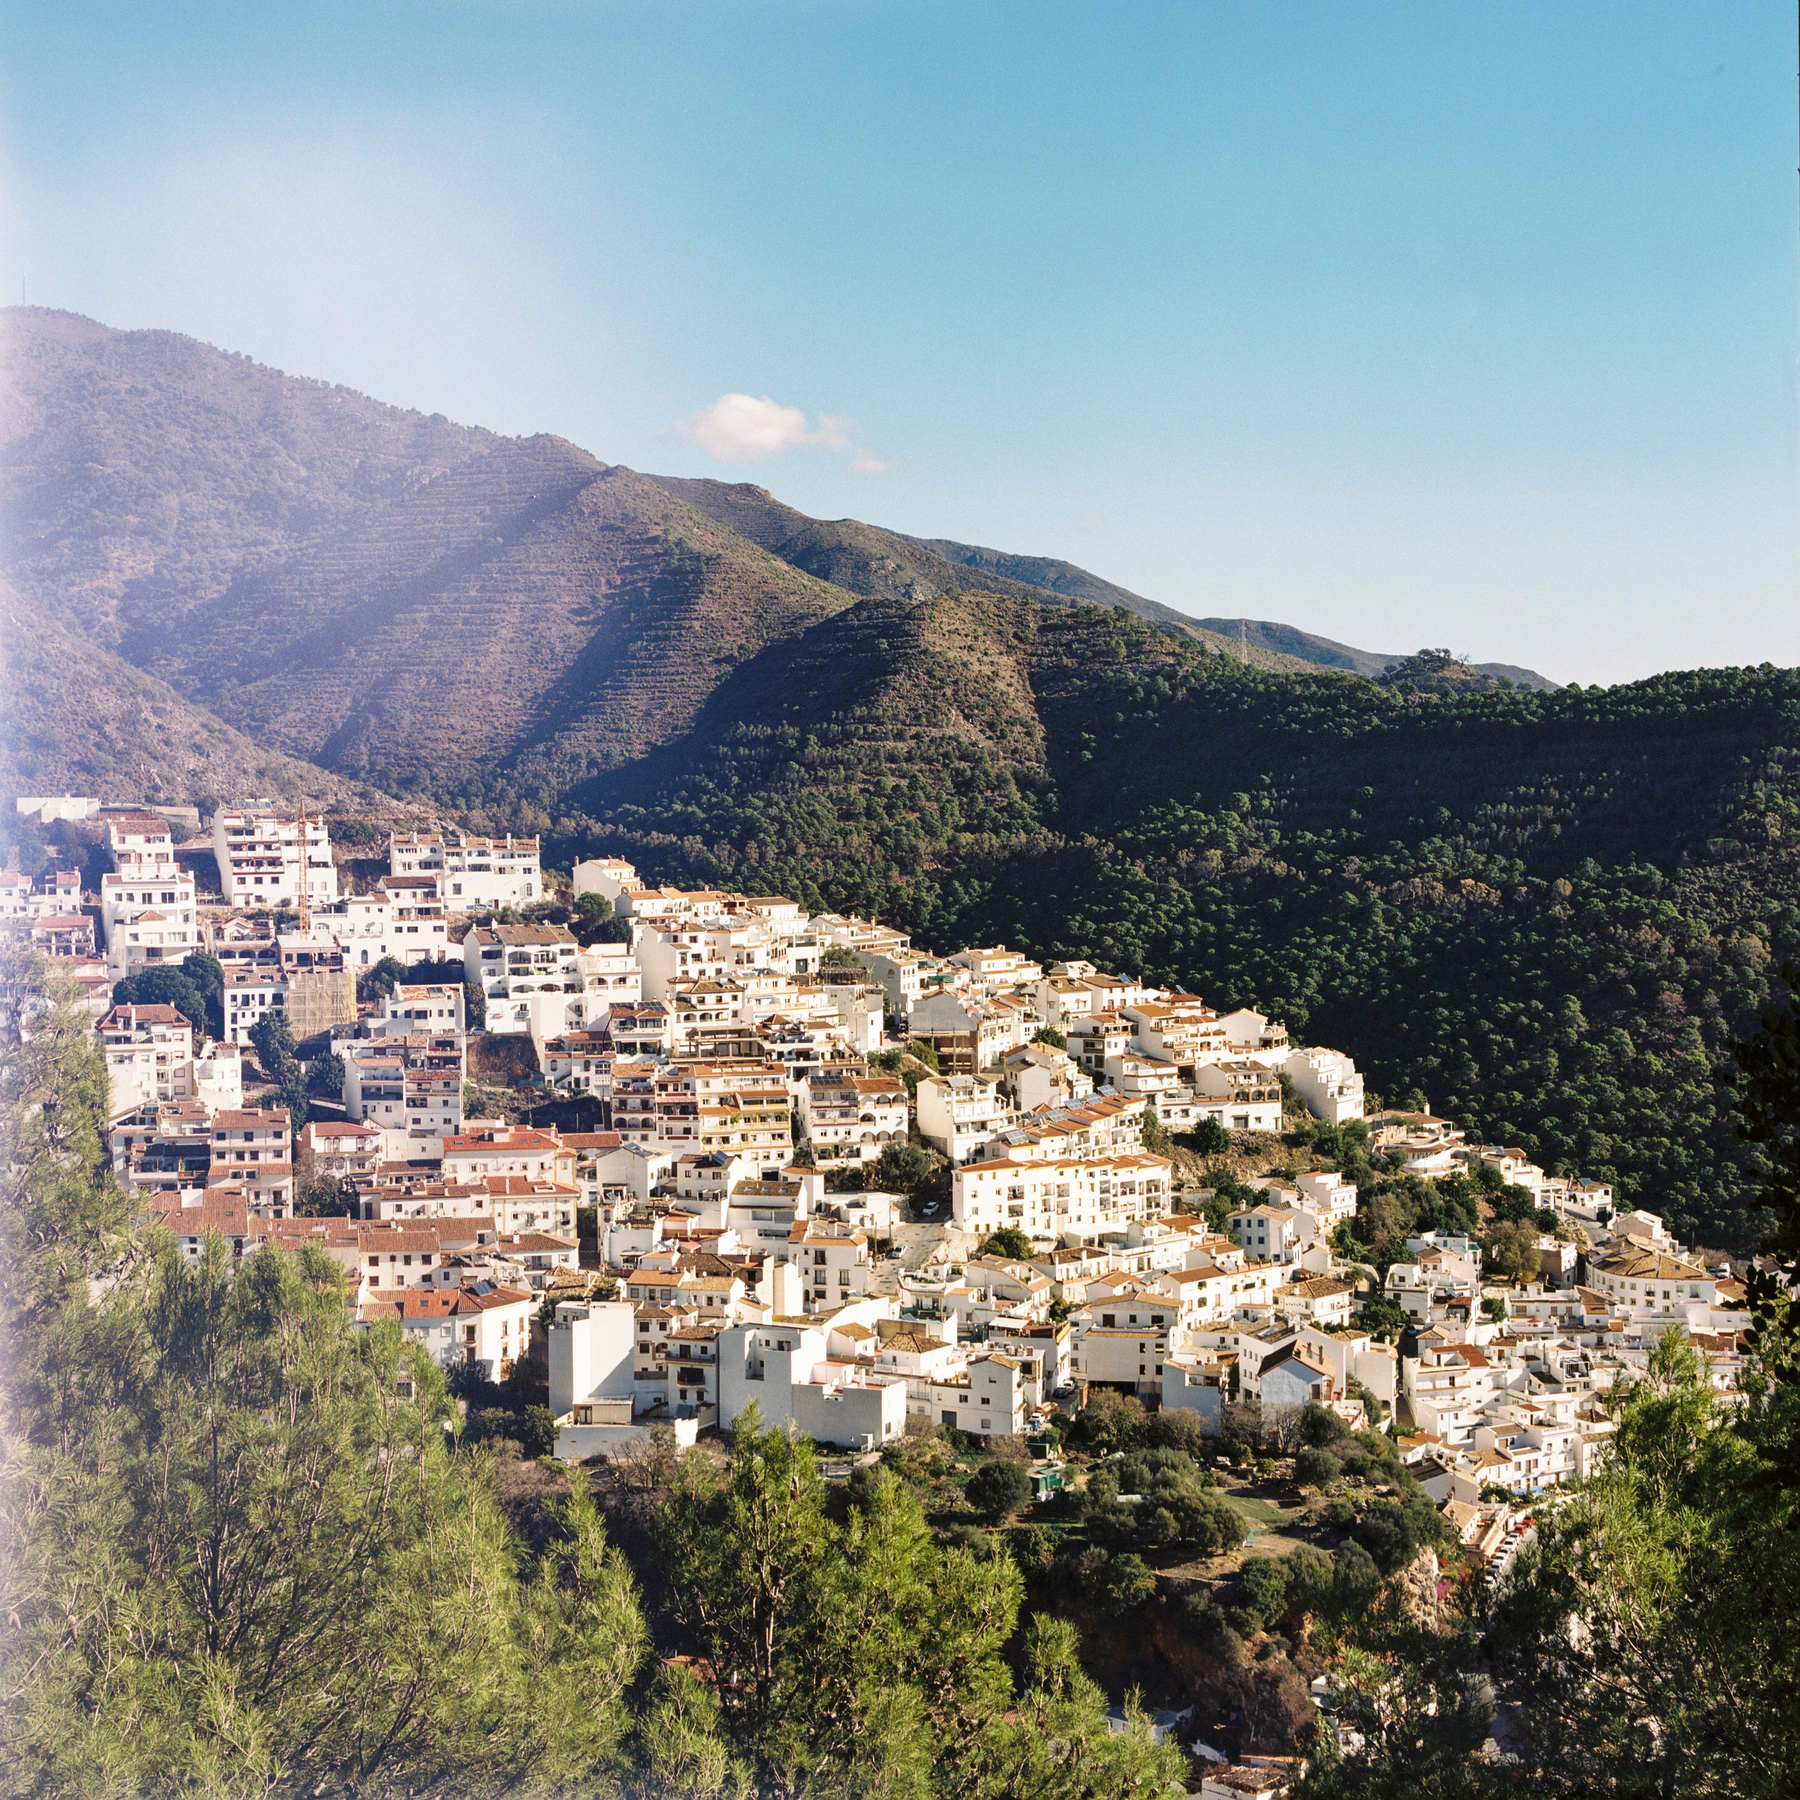 A photograph overlooking a town of white buildings and terracotta roofs. The town is backed by a tree covered mountain side. Above the mountain is a blue sky with hints of wispy cloud. To the left of the frame are some like leaks that distort color.